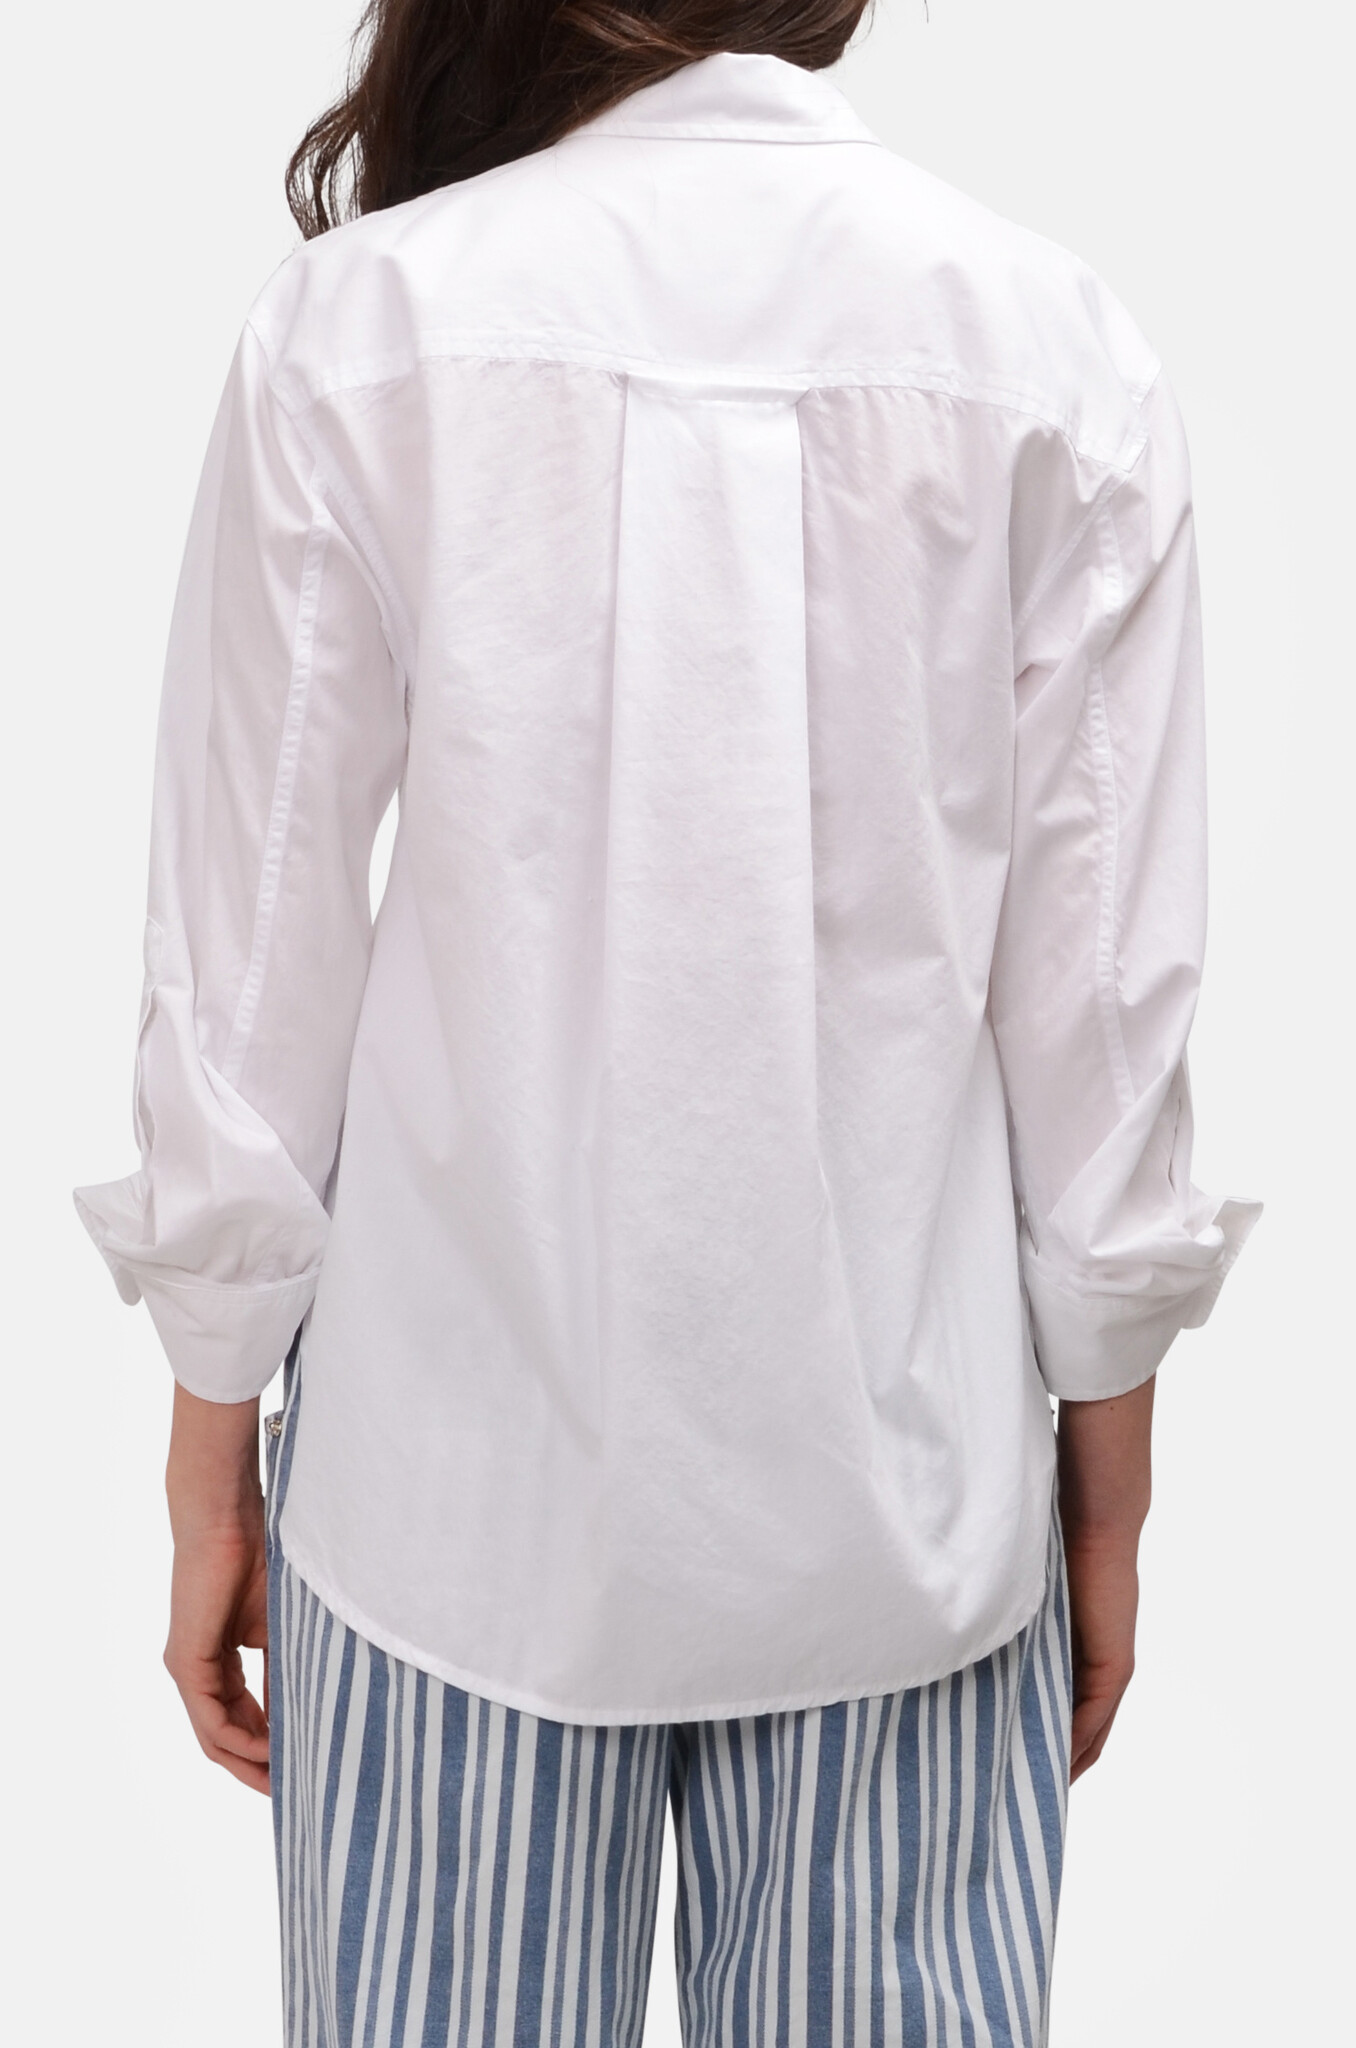 Aave Oversized Cuff Shirt in Optic White-4